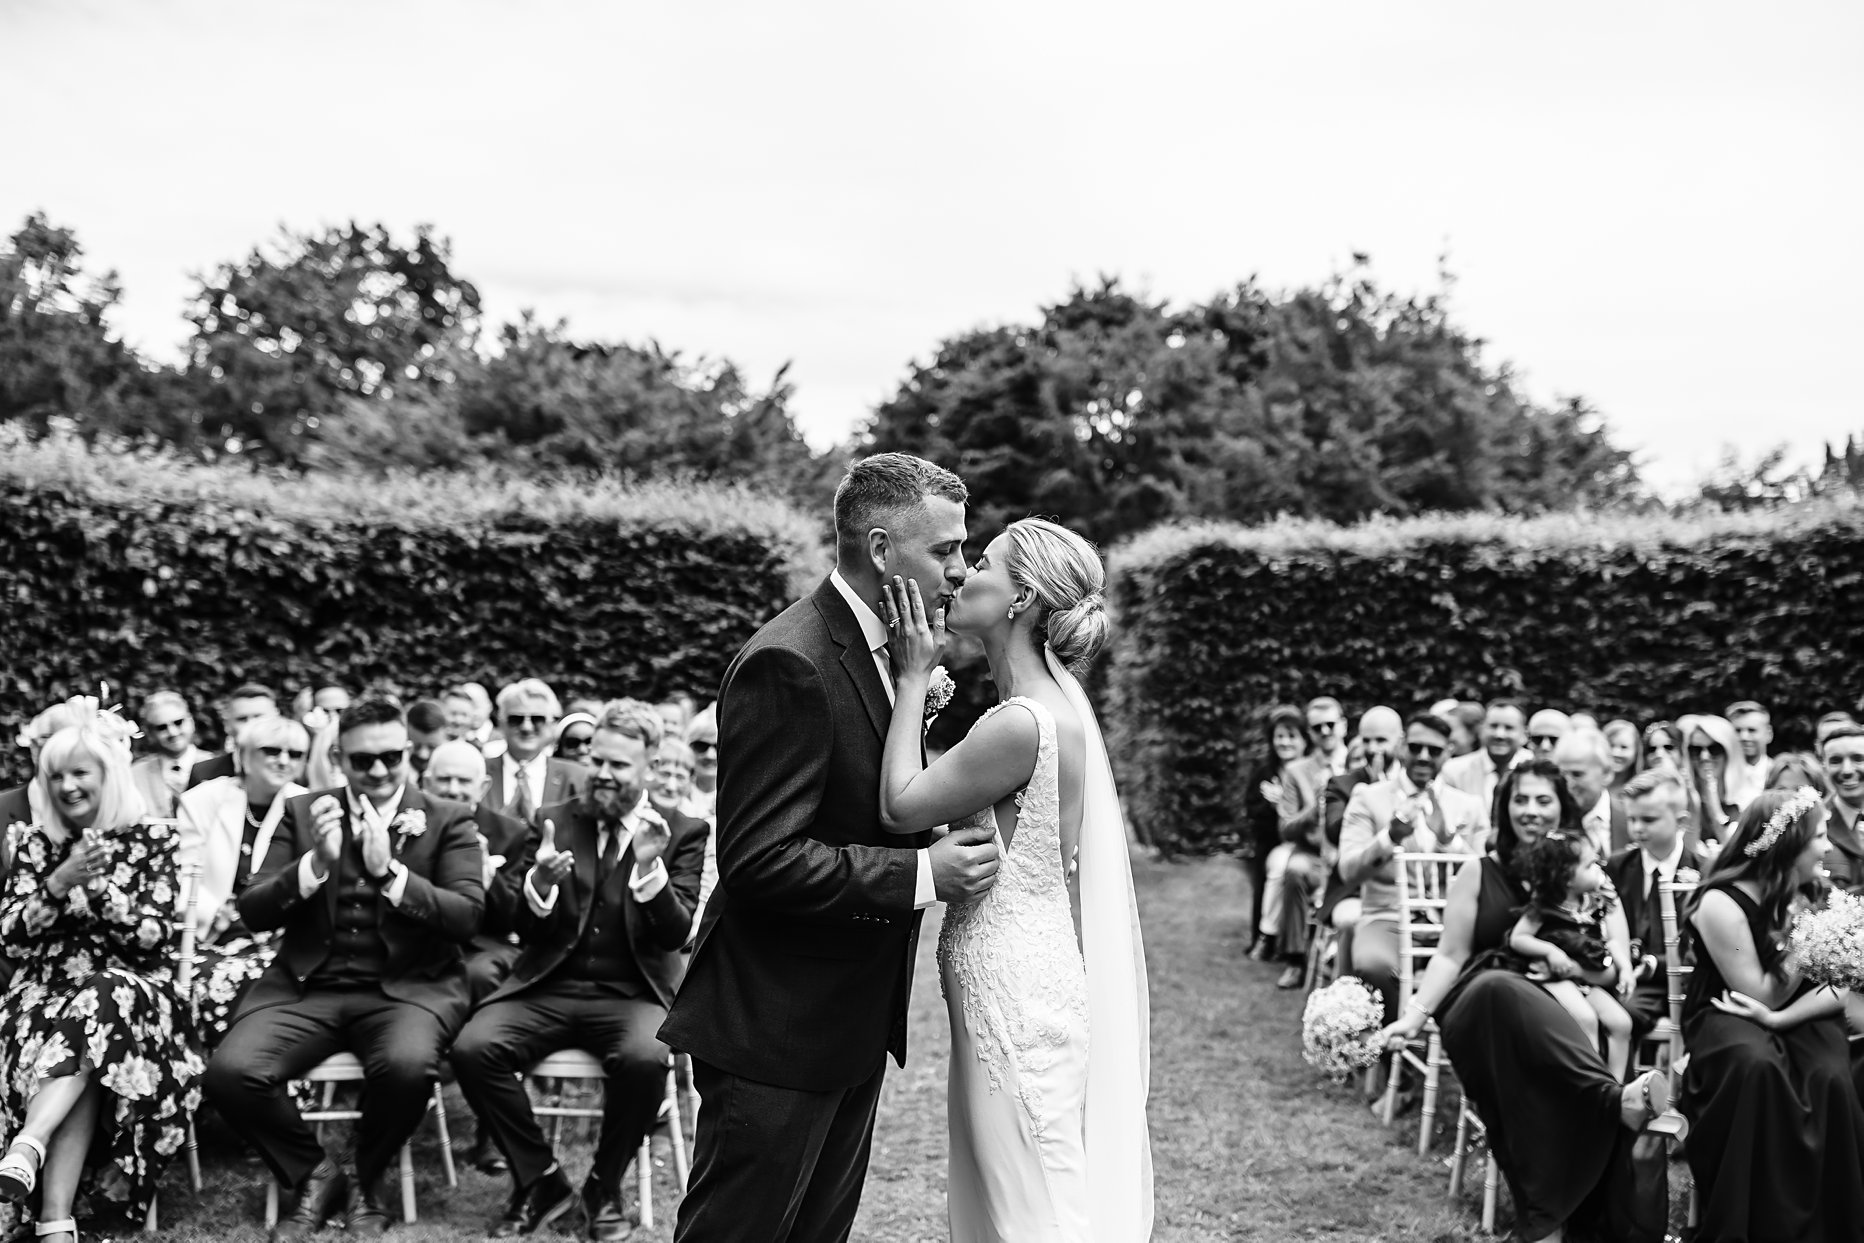 Outdoor ceremony at Saltmarshe hall. Black and white photo of a bride and groom having their first kiss after their ceremony. The bride is holding the grooms face and guests are sat behind clapping. 